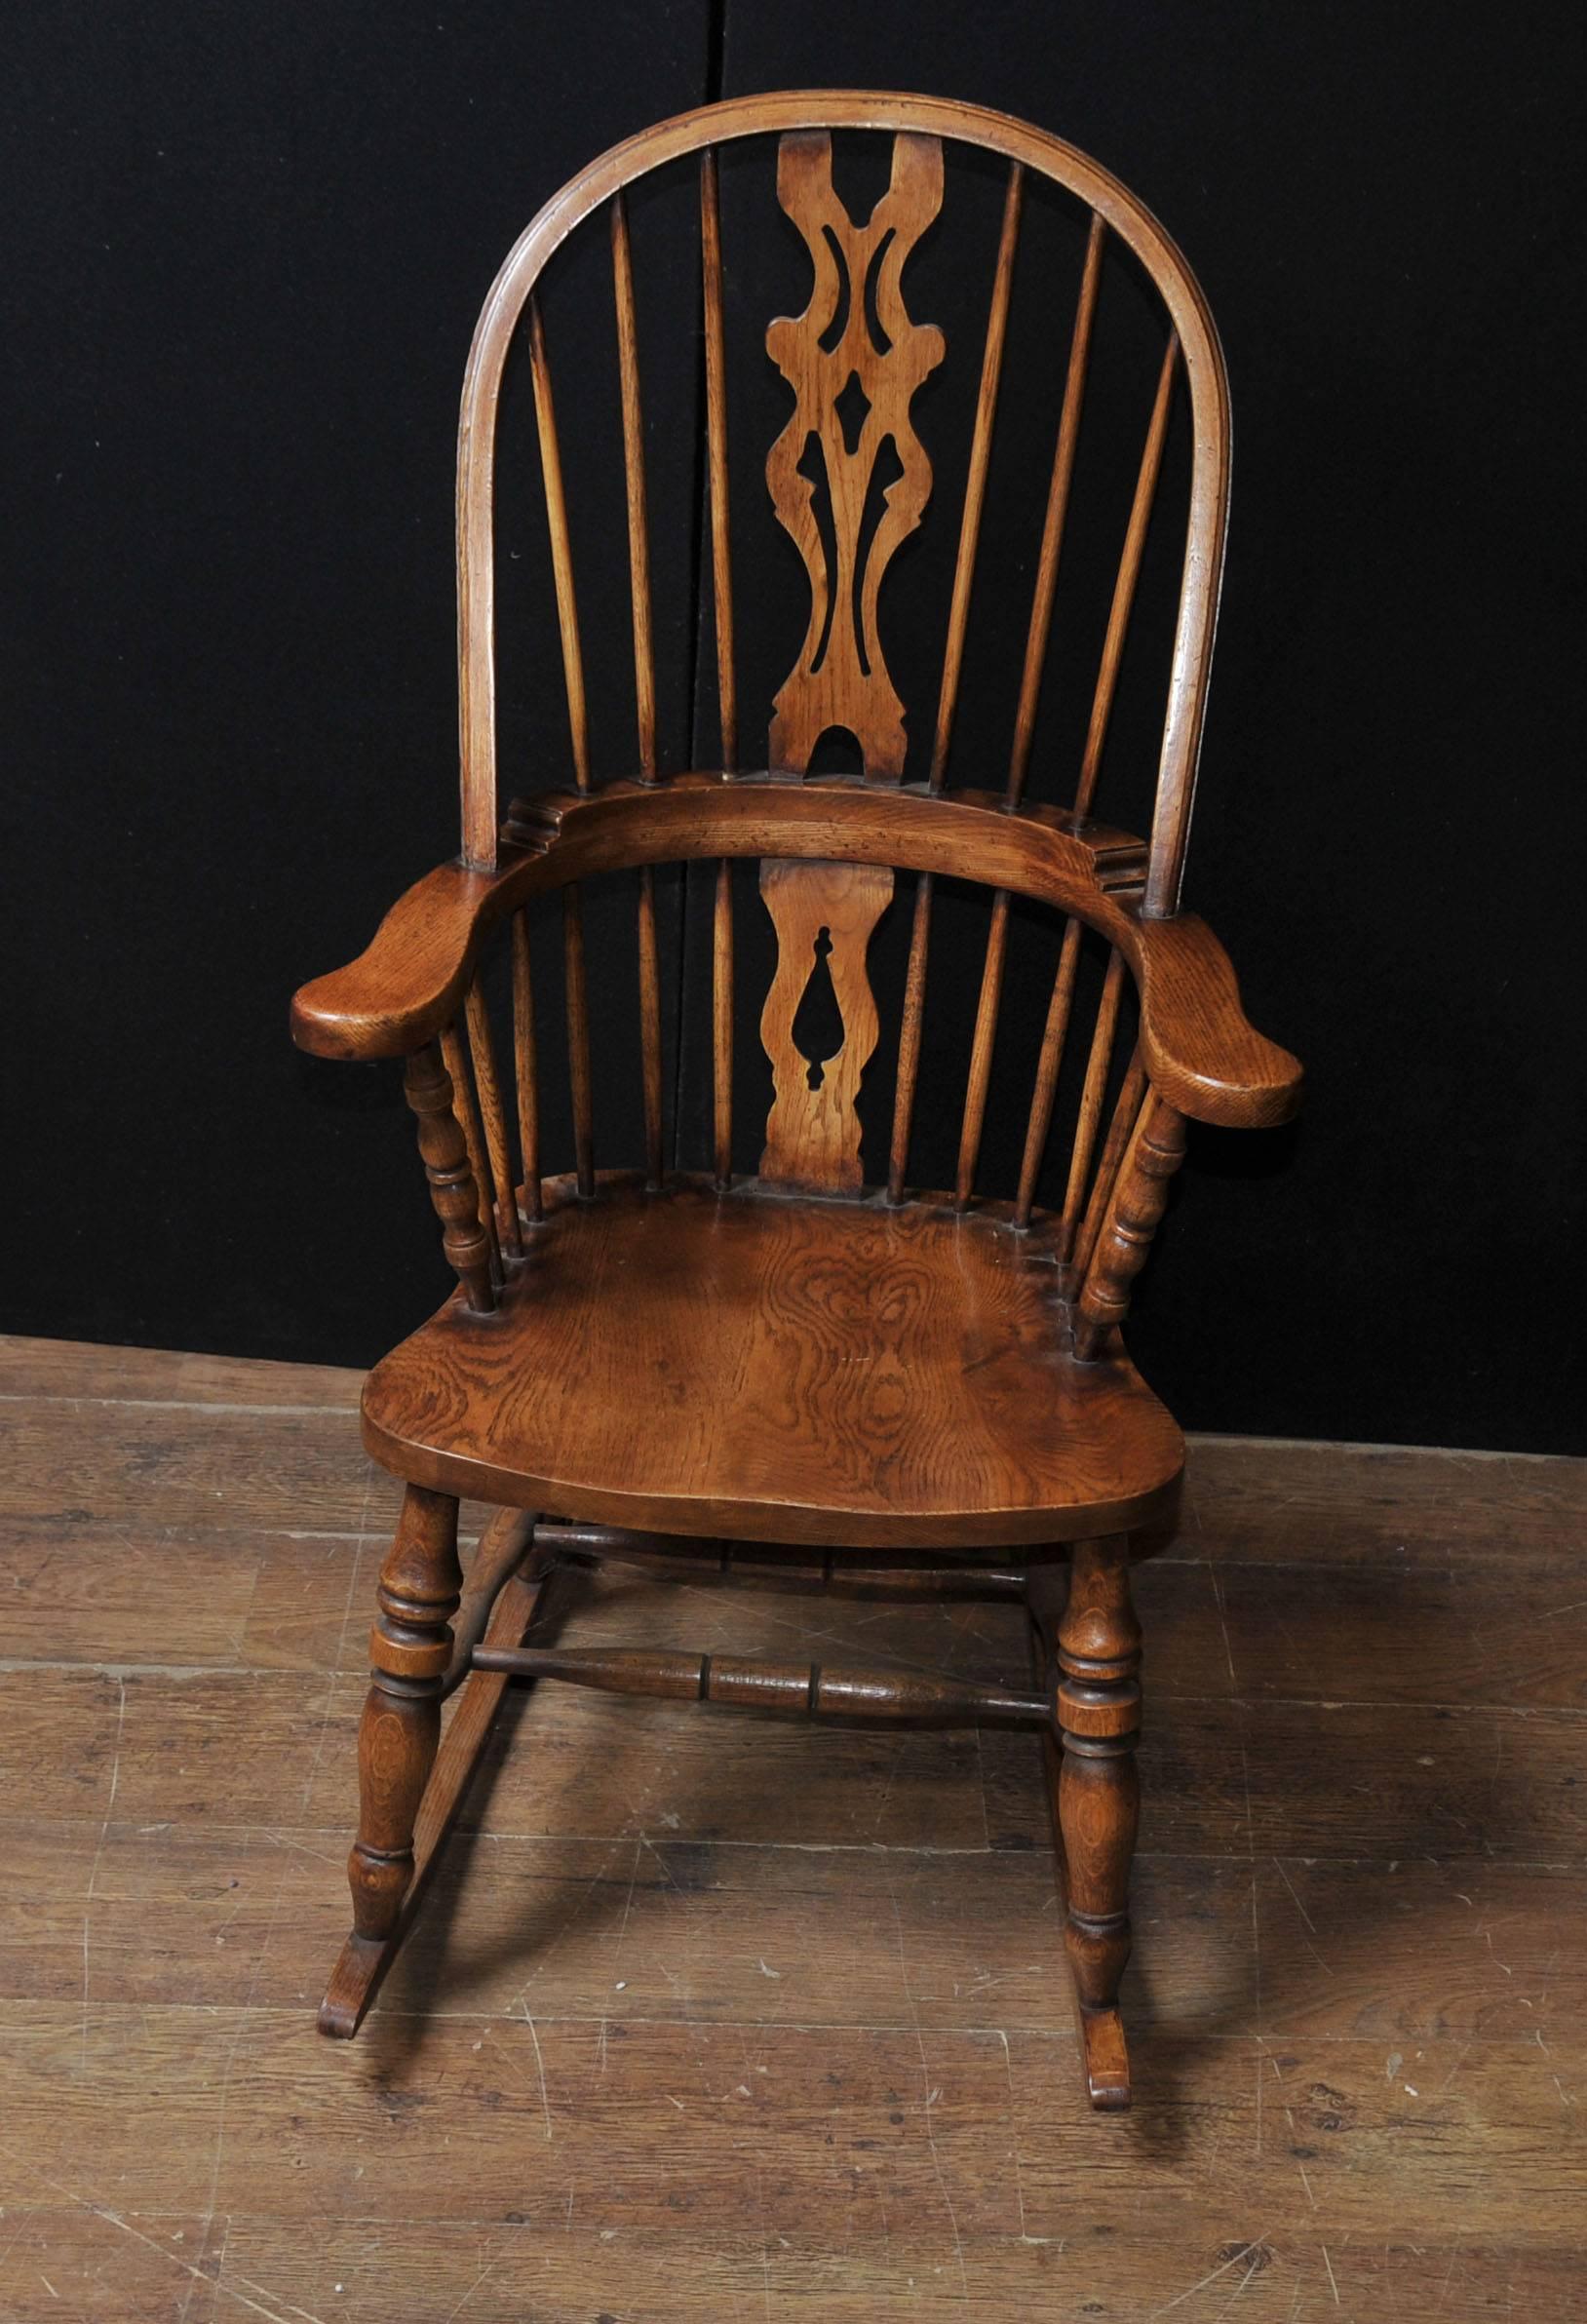 Hand-Carved English Windsor Rocking Chair Farmhouse Chairs In Good Condition For Sale In Potters Bar, Herts